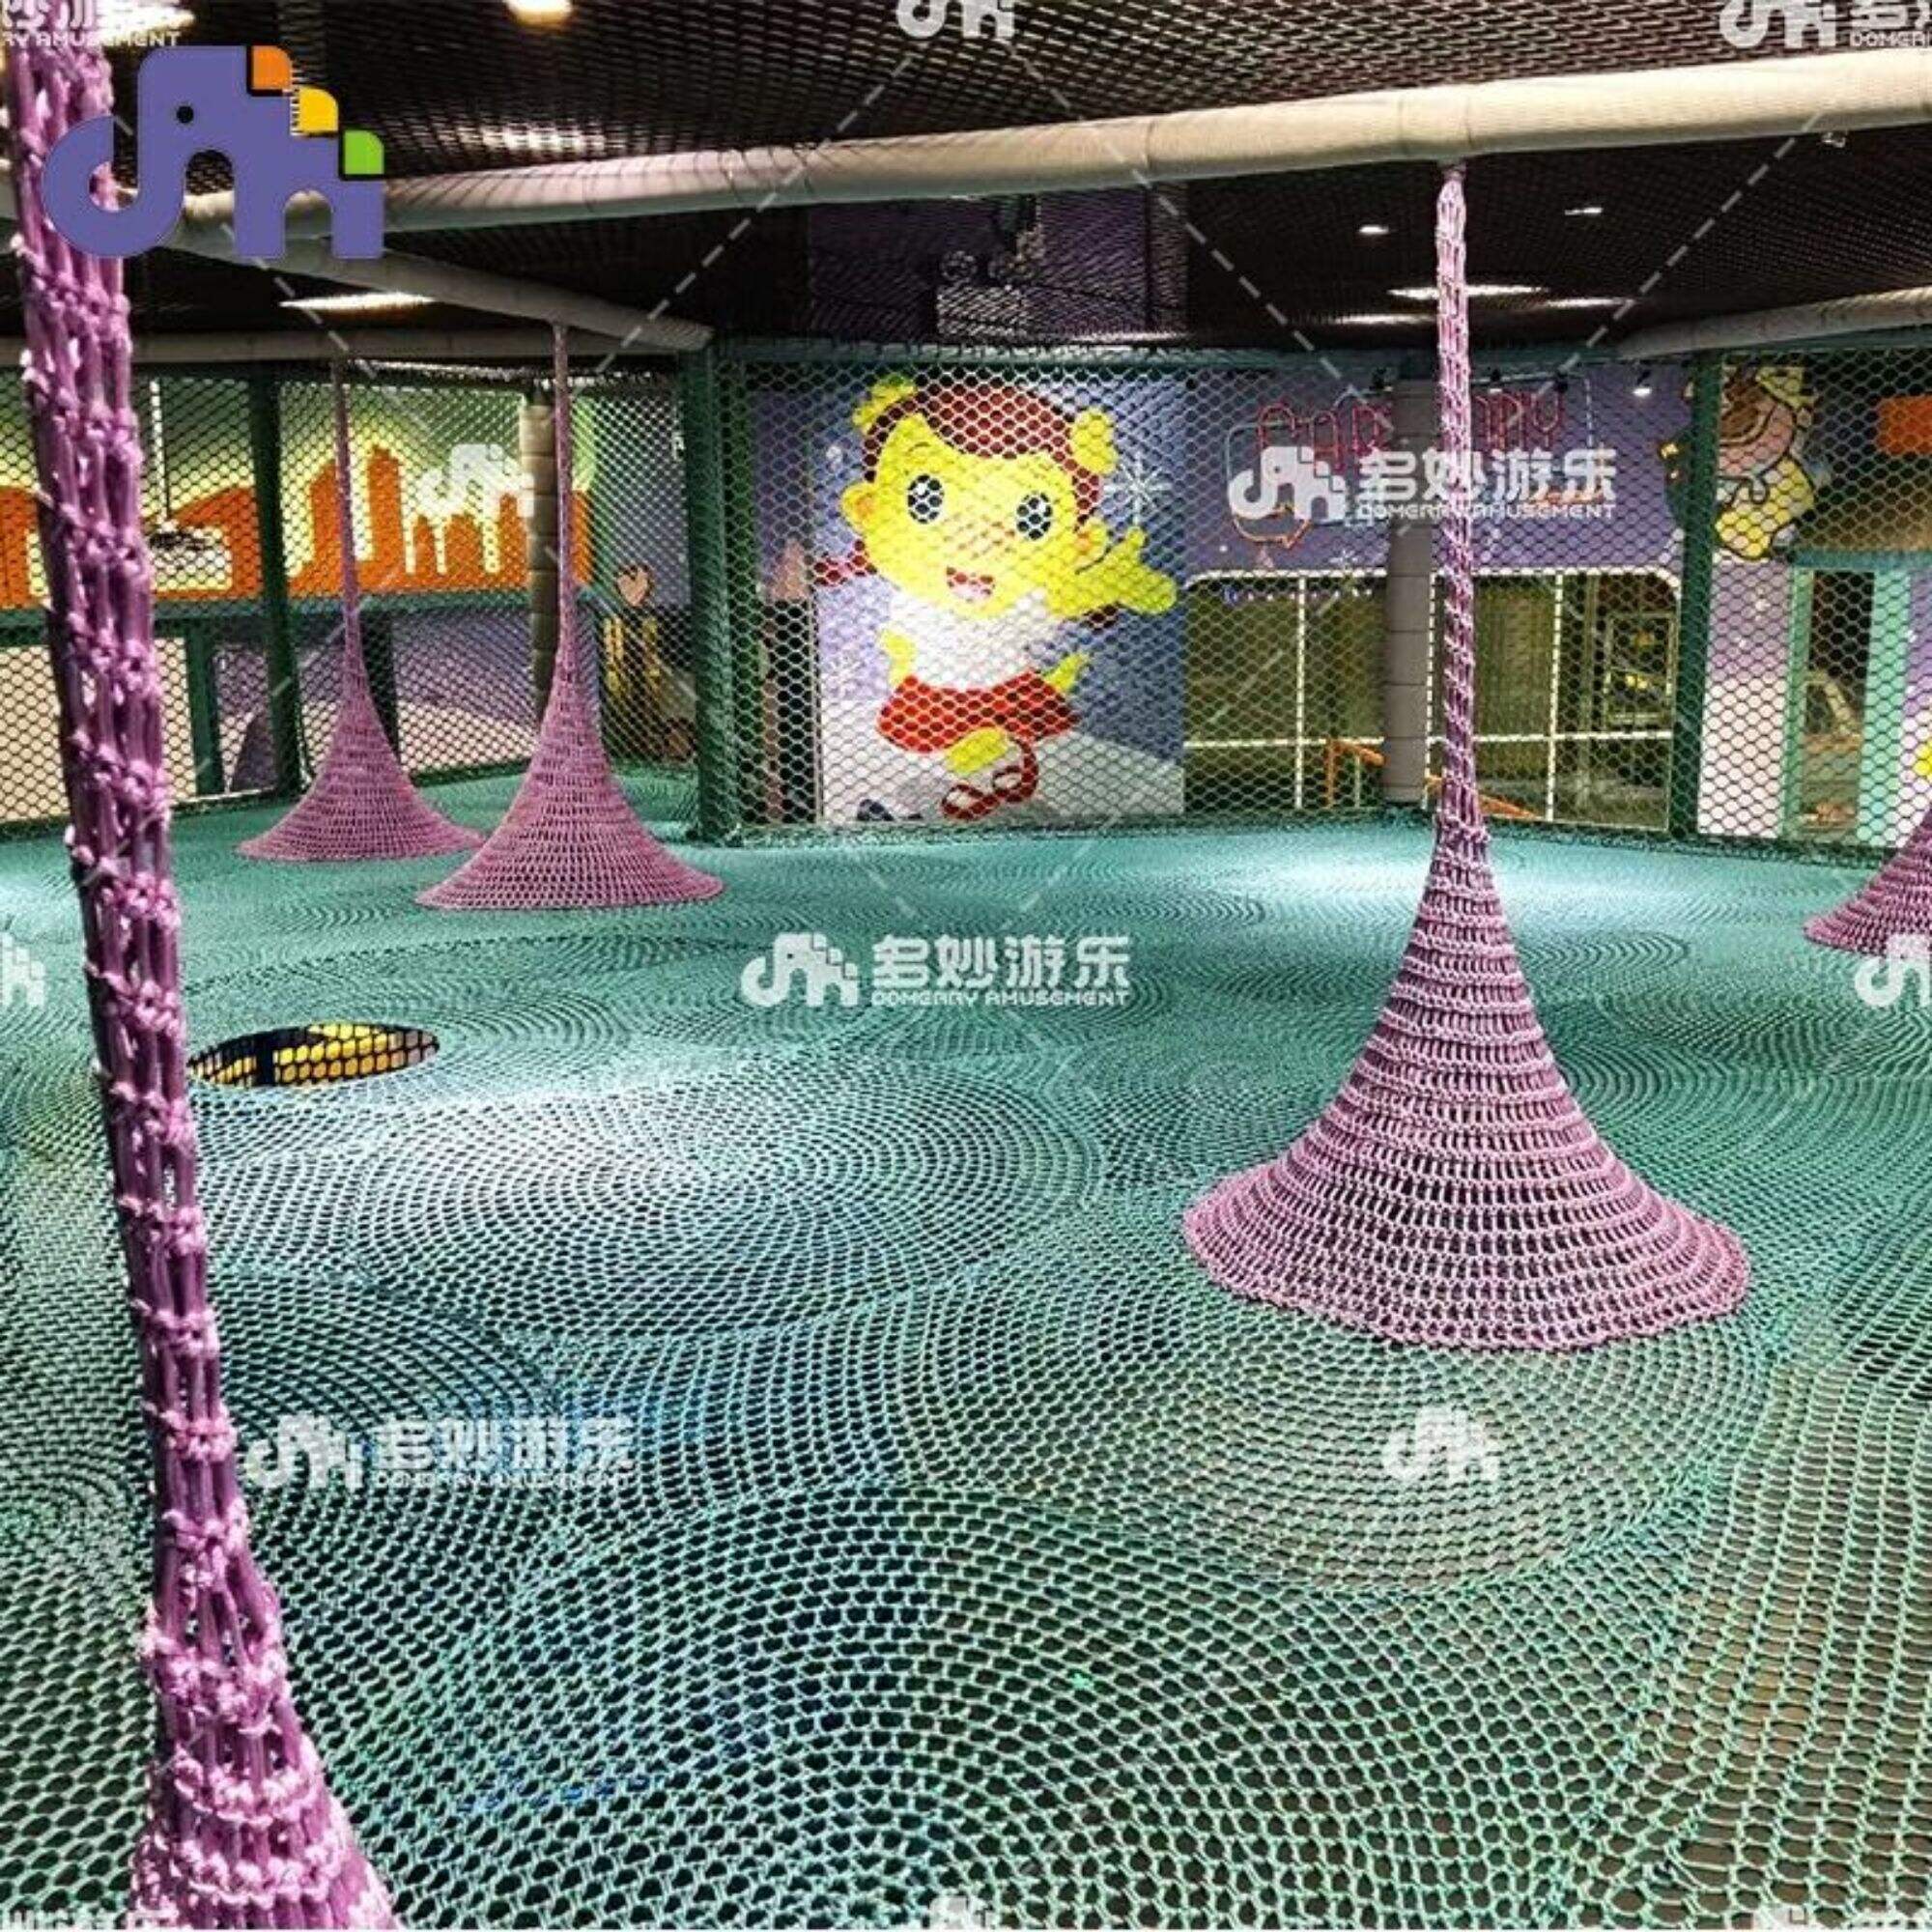 Rainbow Nets soft Durable Playground Equipment Small Indoor Amusement Park Play Set for Children Made from Long-Lasting Nylon